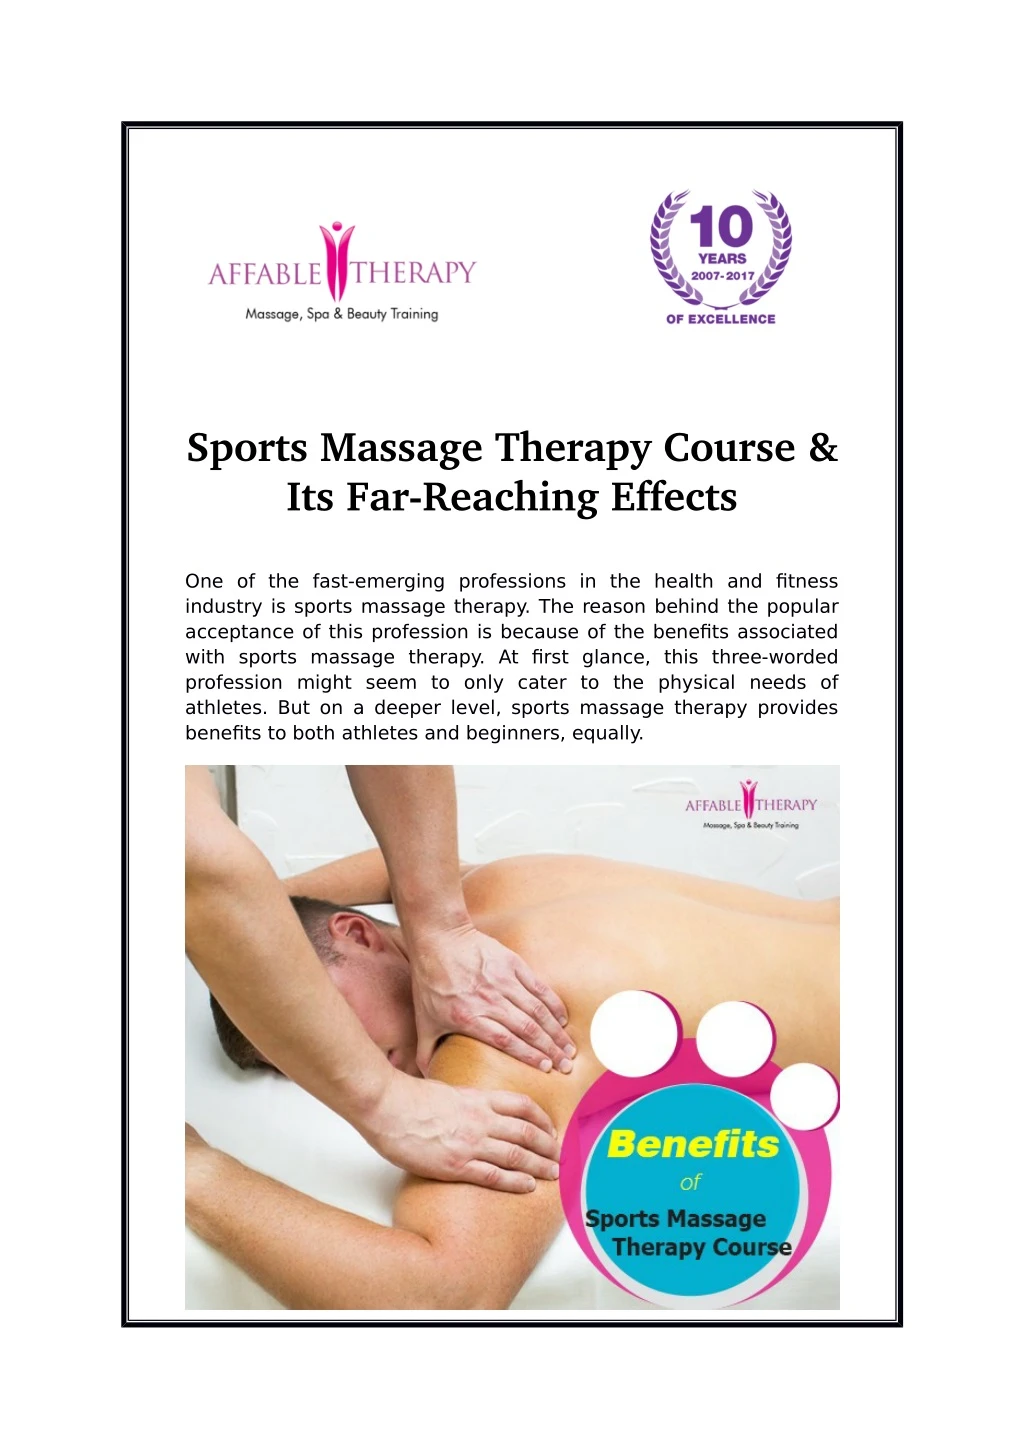 sports massage therapy course its far reaching